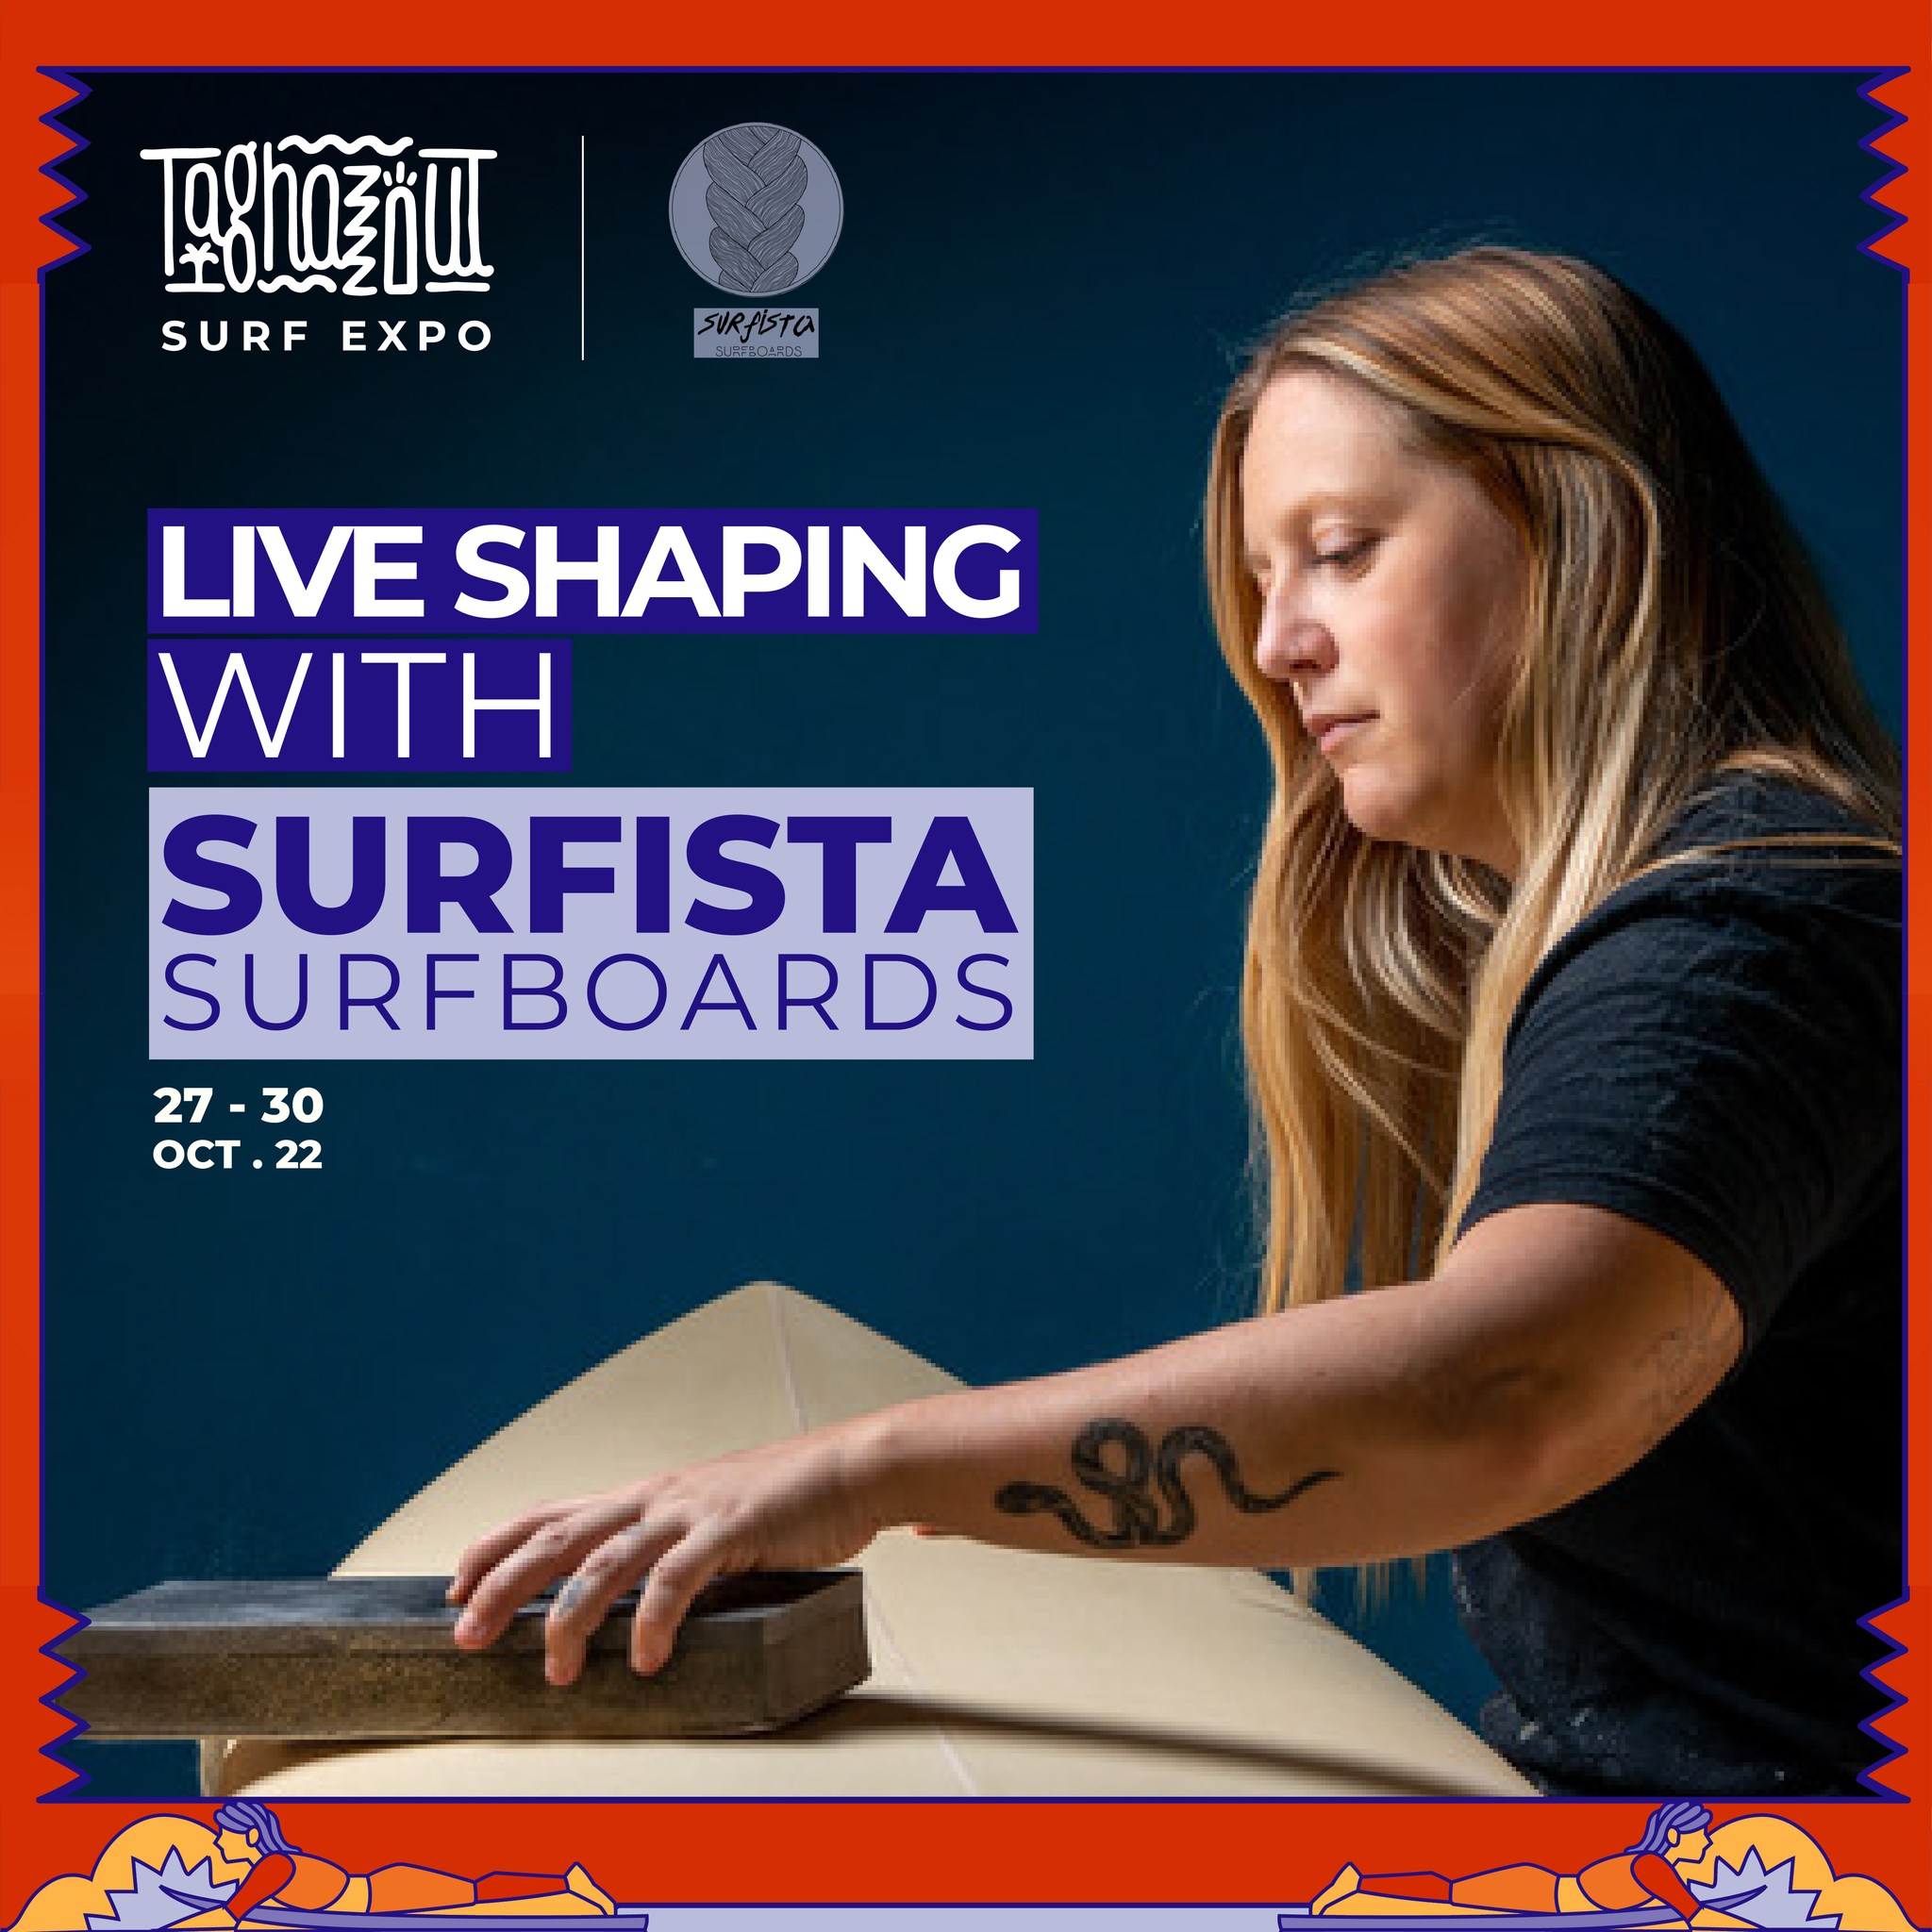 Live shaping with Surfista in Morocco